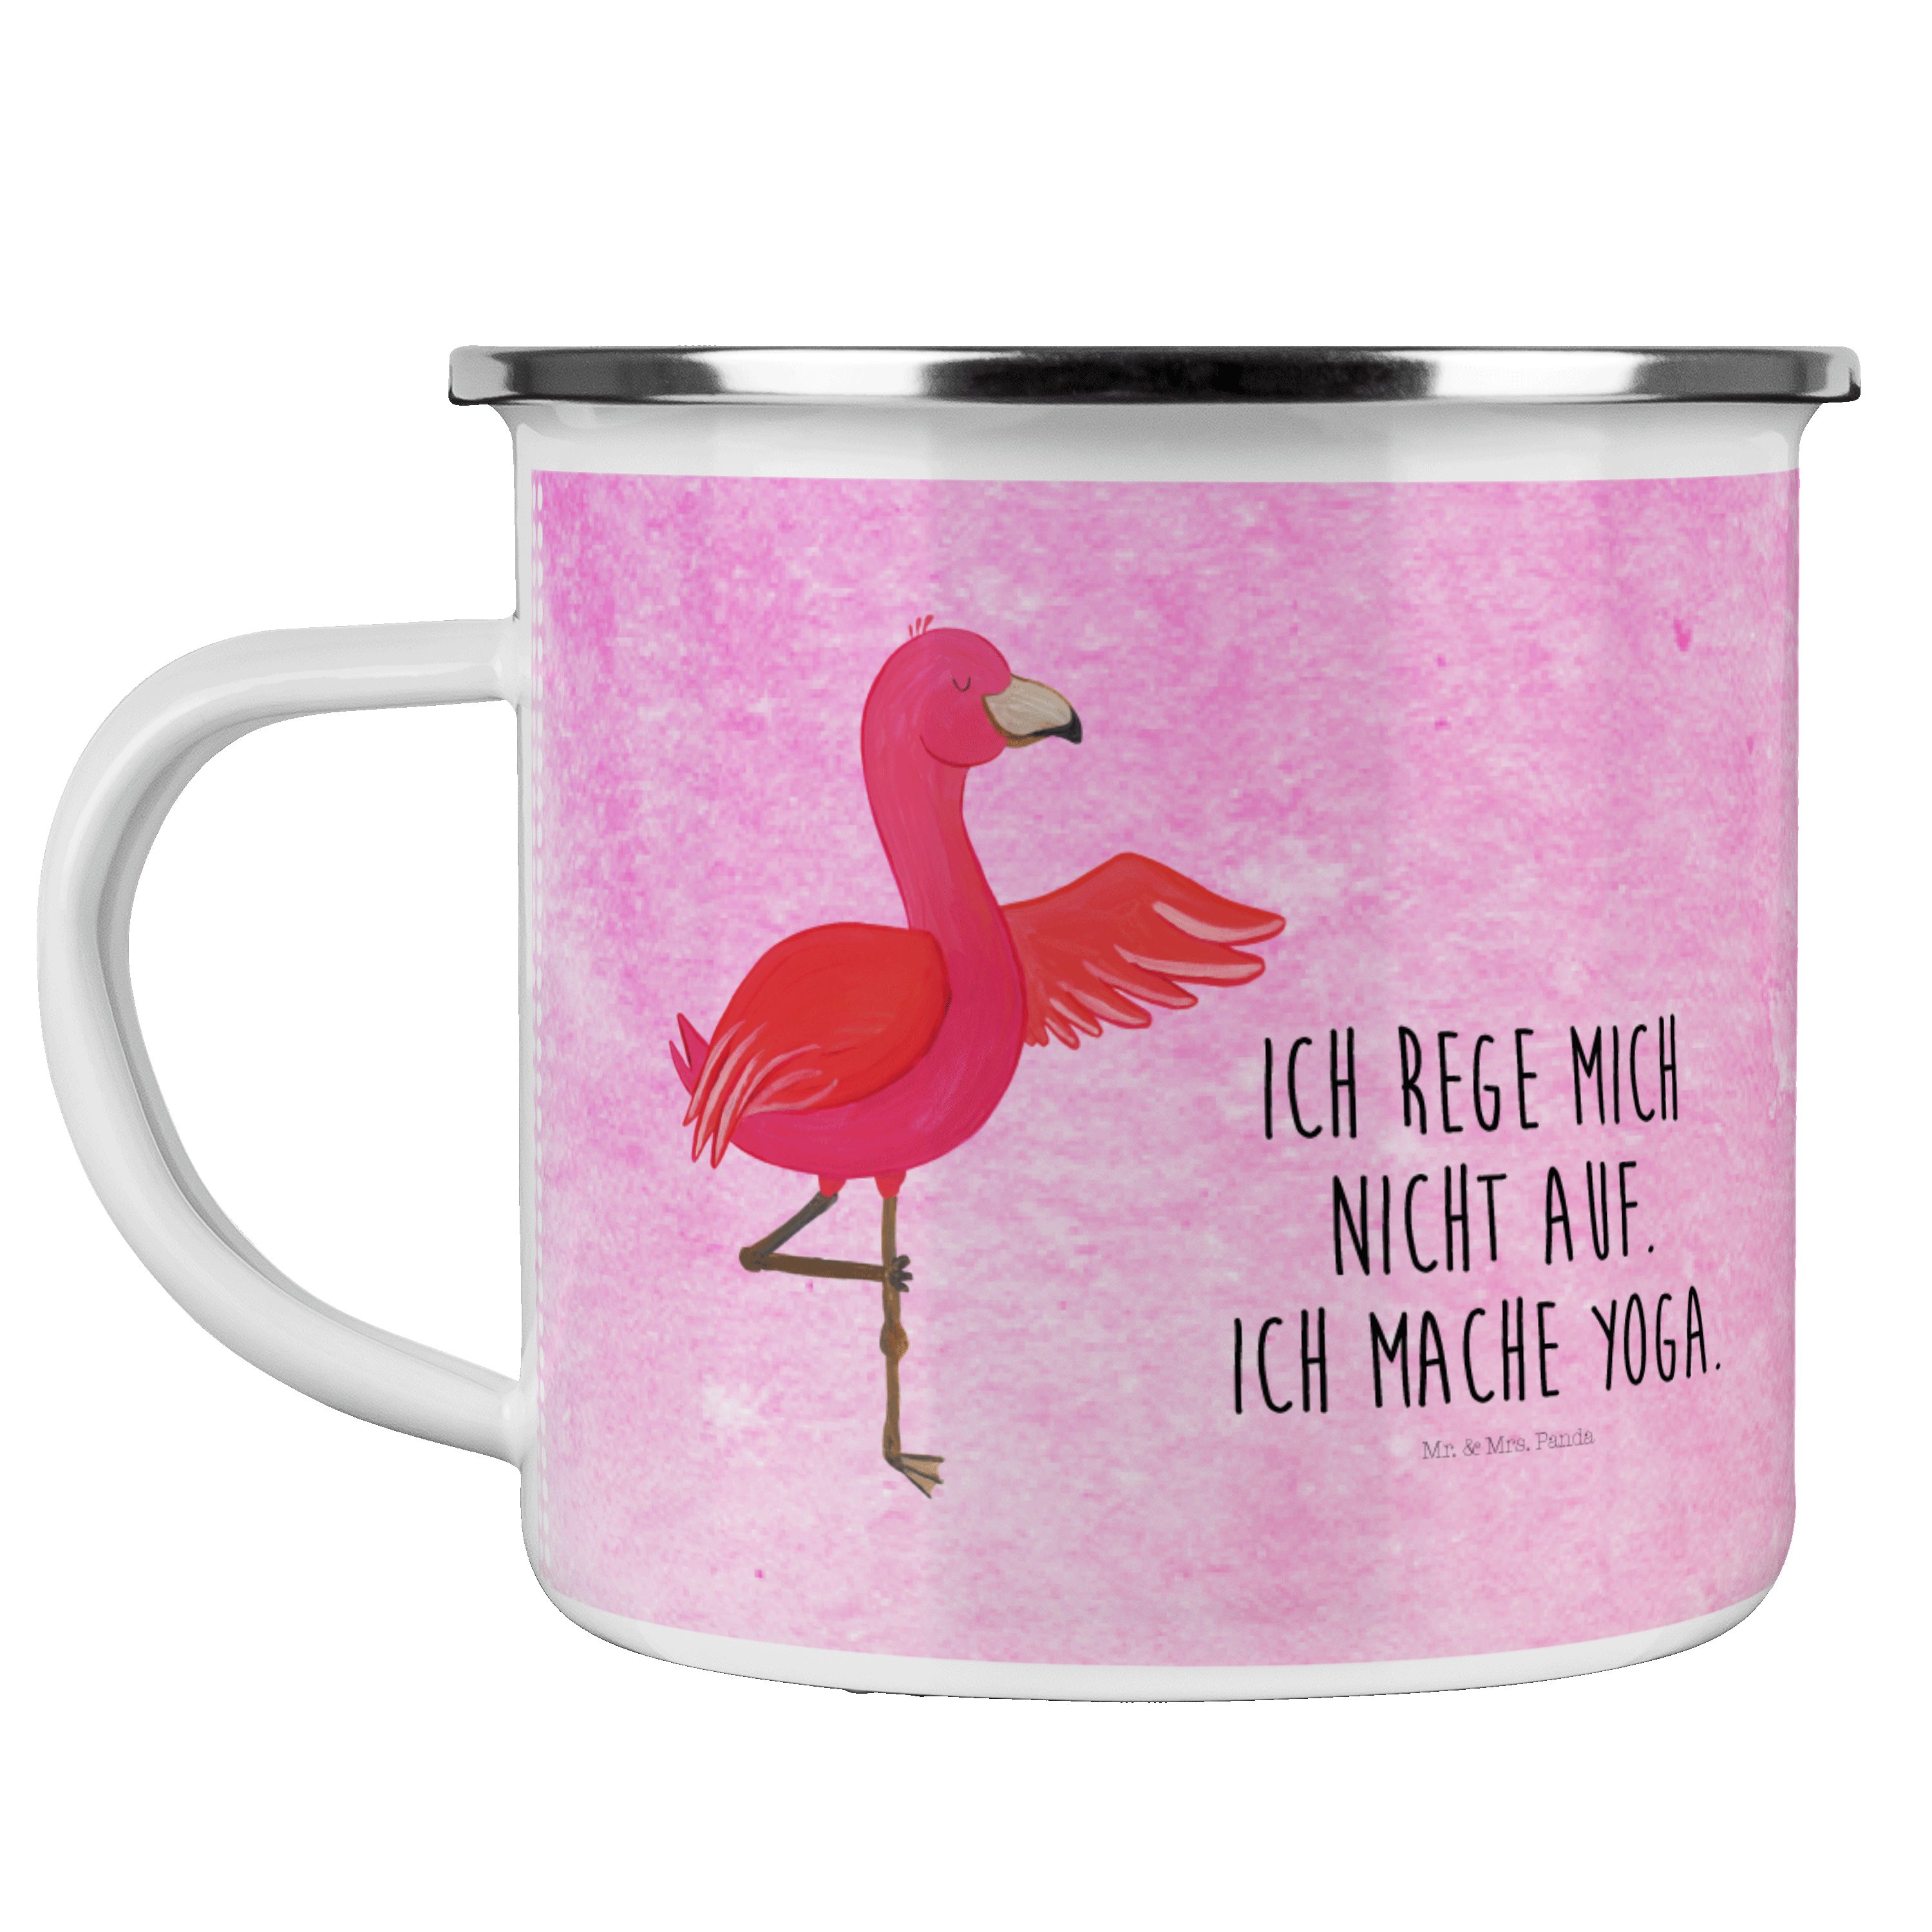 Mr. & Mrs. Panda Becher Flamingo Yoga - Aquarell Pink - Geschenk, Emaille Campingbecher, Yoga, Emaille